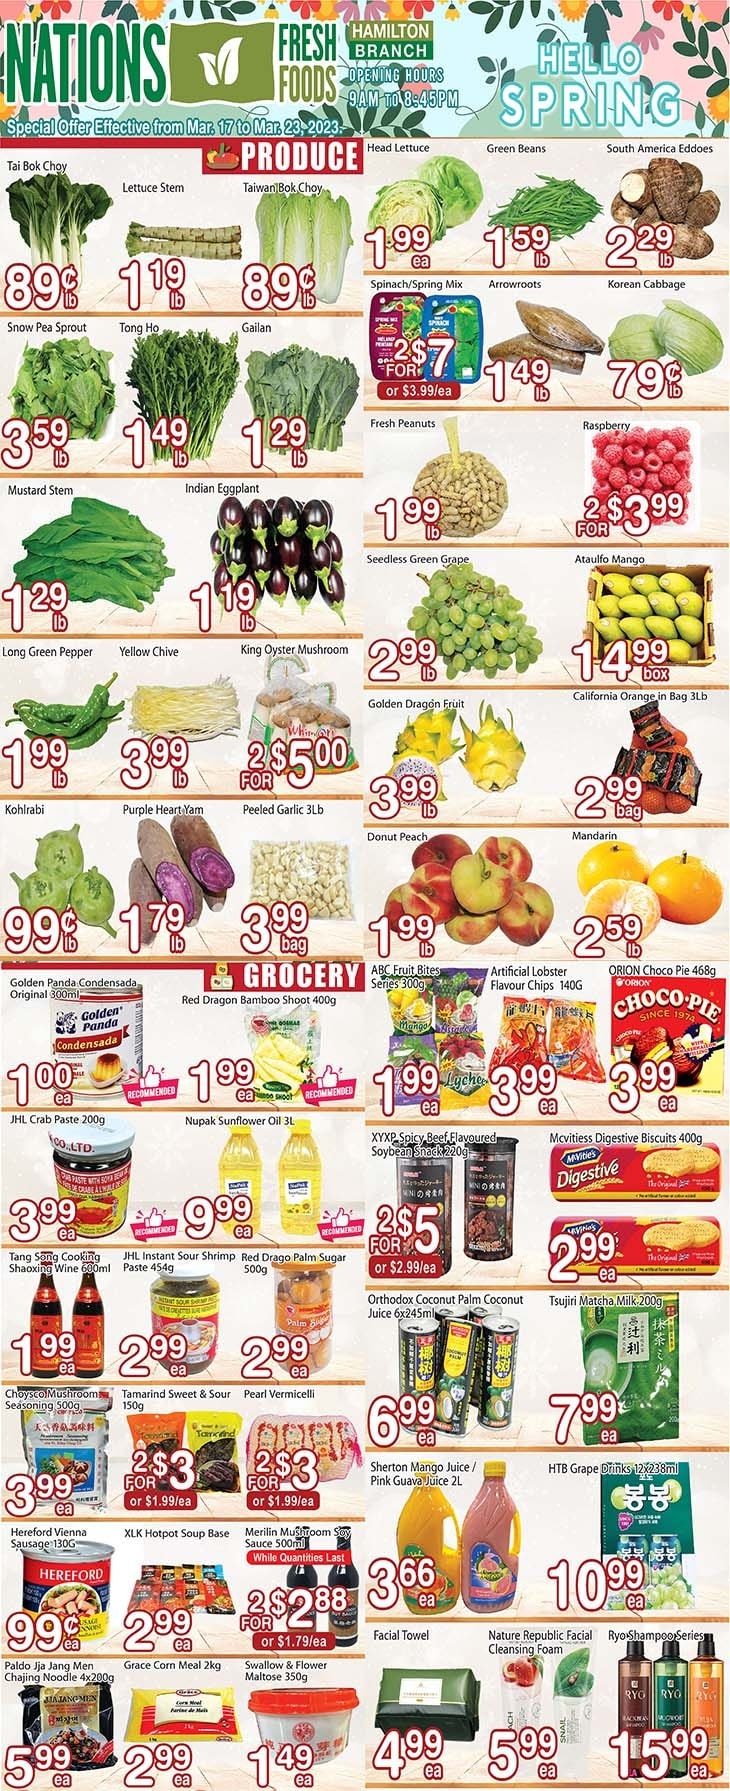 Nations Fresh Foods - Hamilton - Weekly Flyer Specials - Page 1